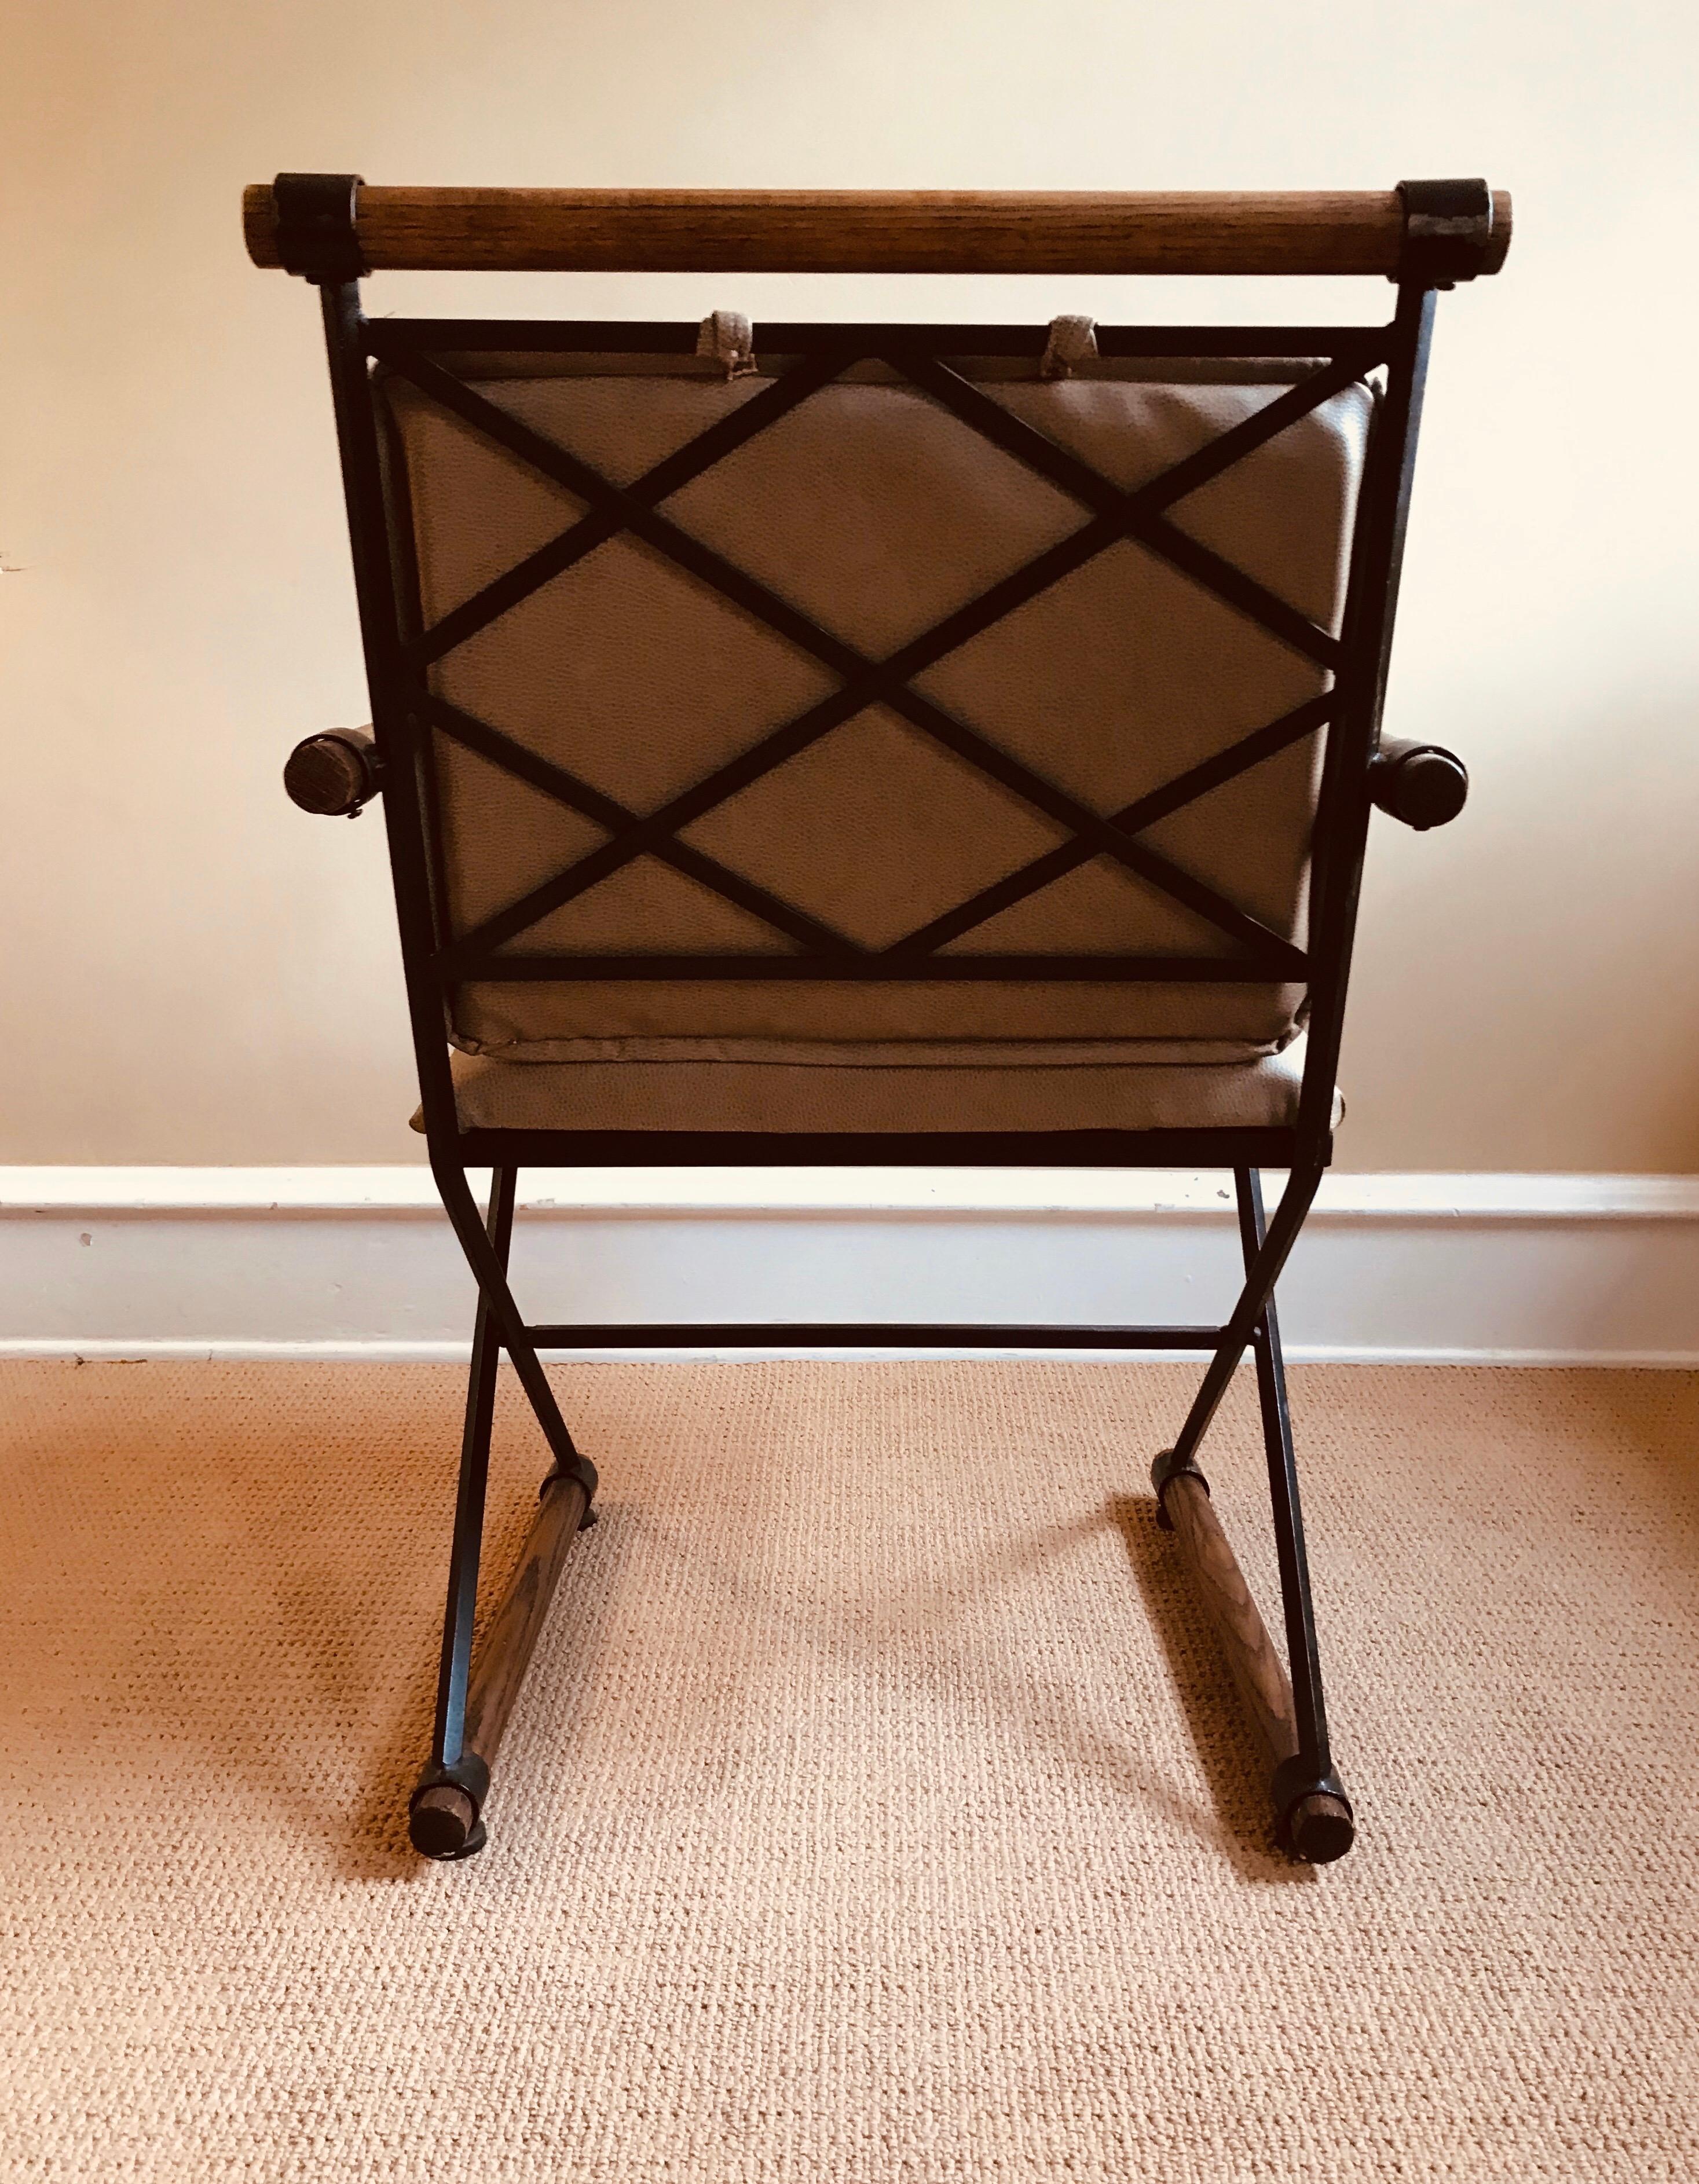 American Midcentury Iron and Fumed Oak Directors Chair by Inca, Cleo Baldon Style